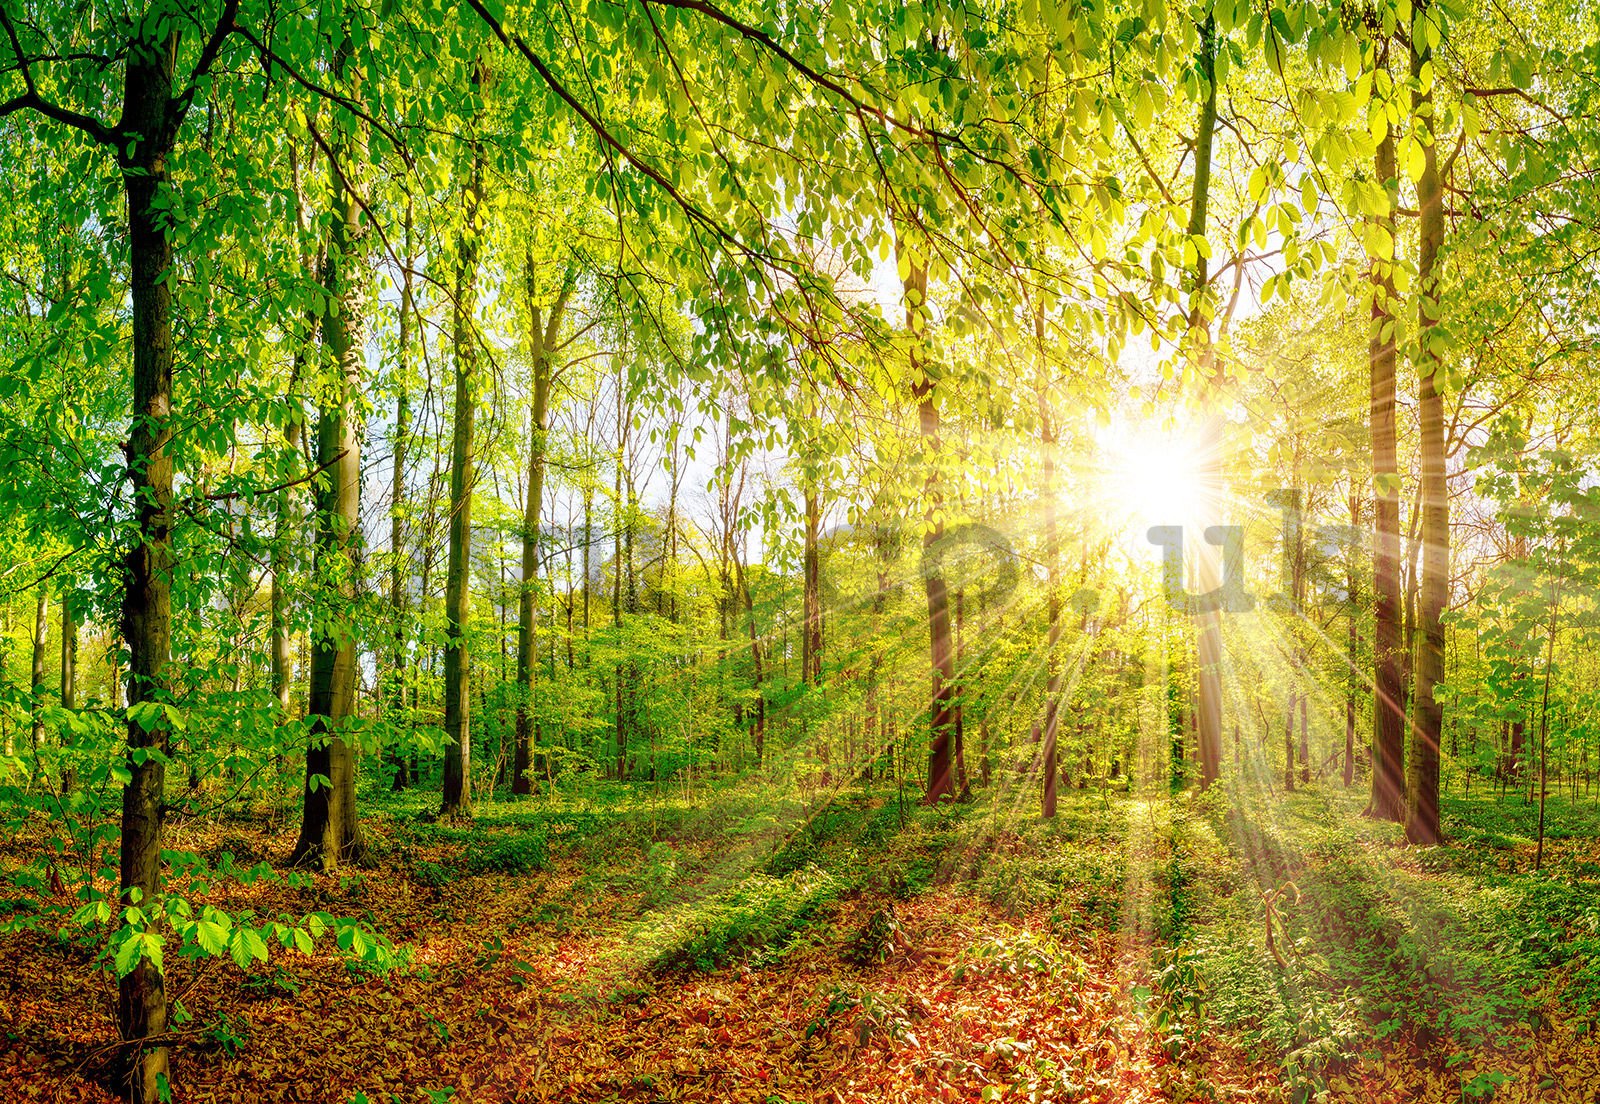 Wall mural vlies: Sun in the forest - 368x254 cm